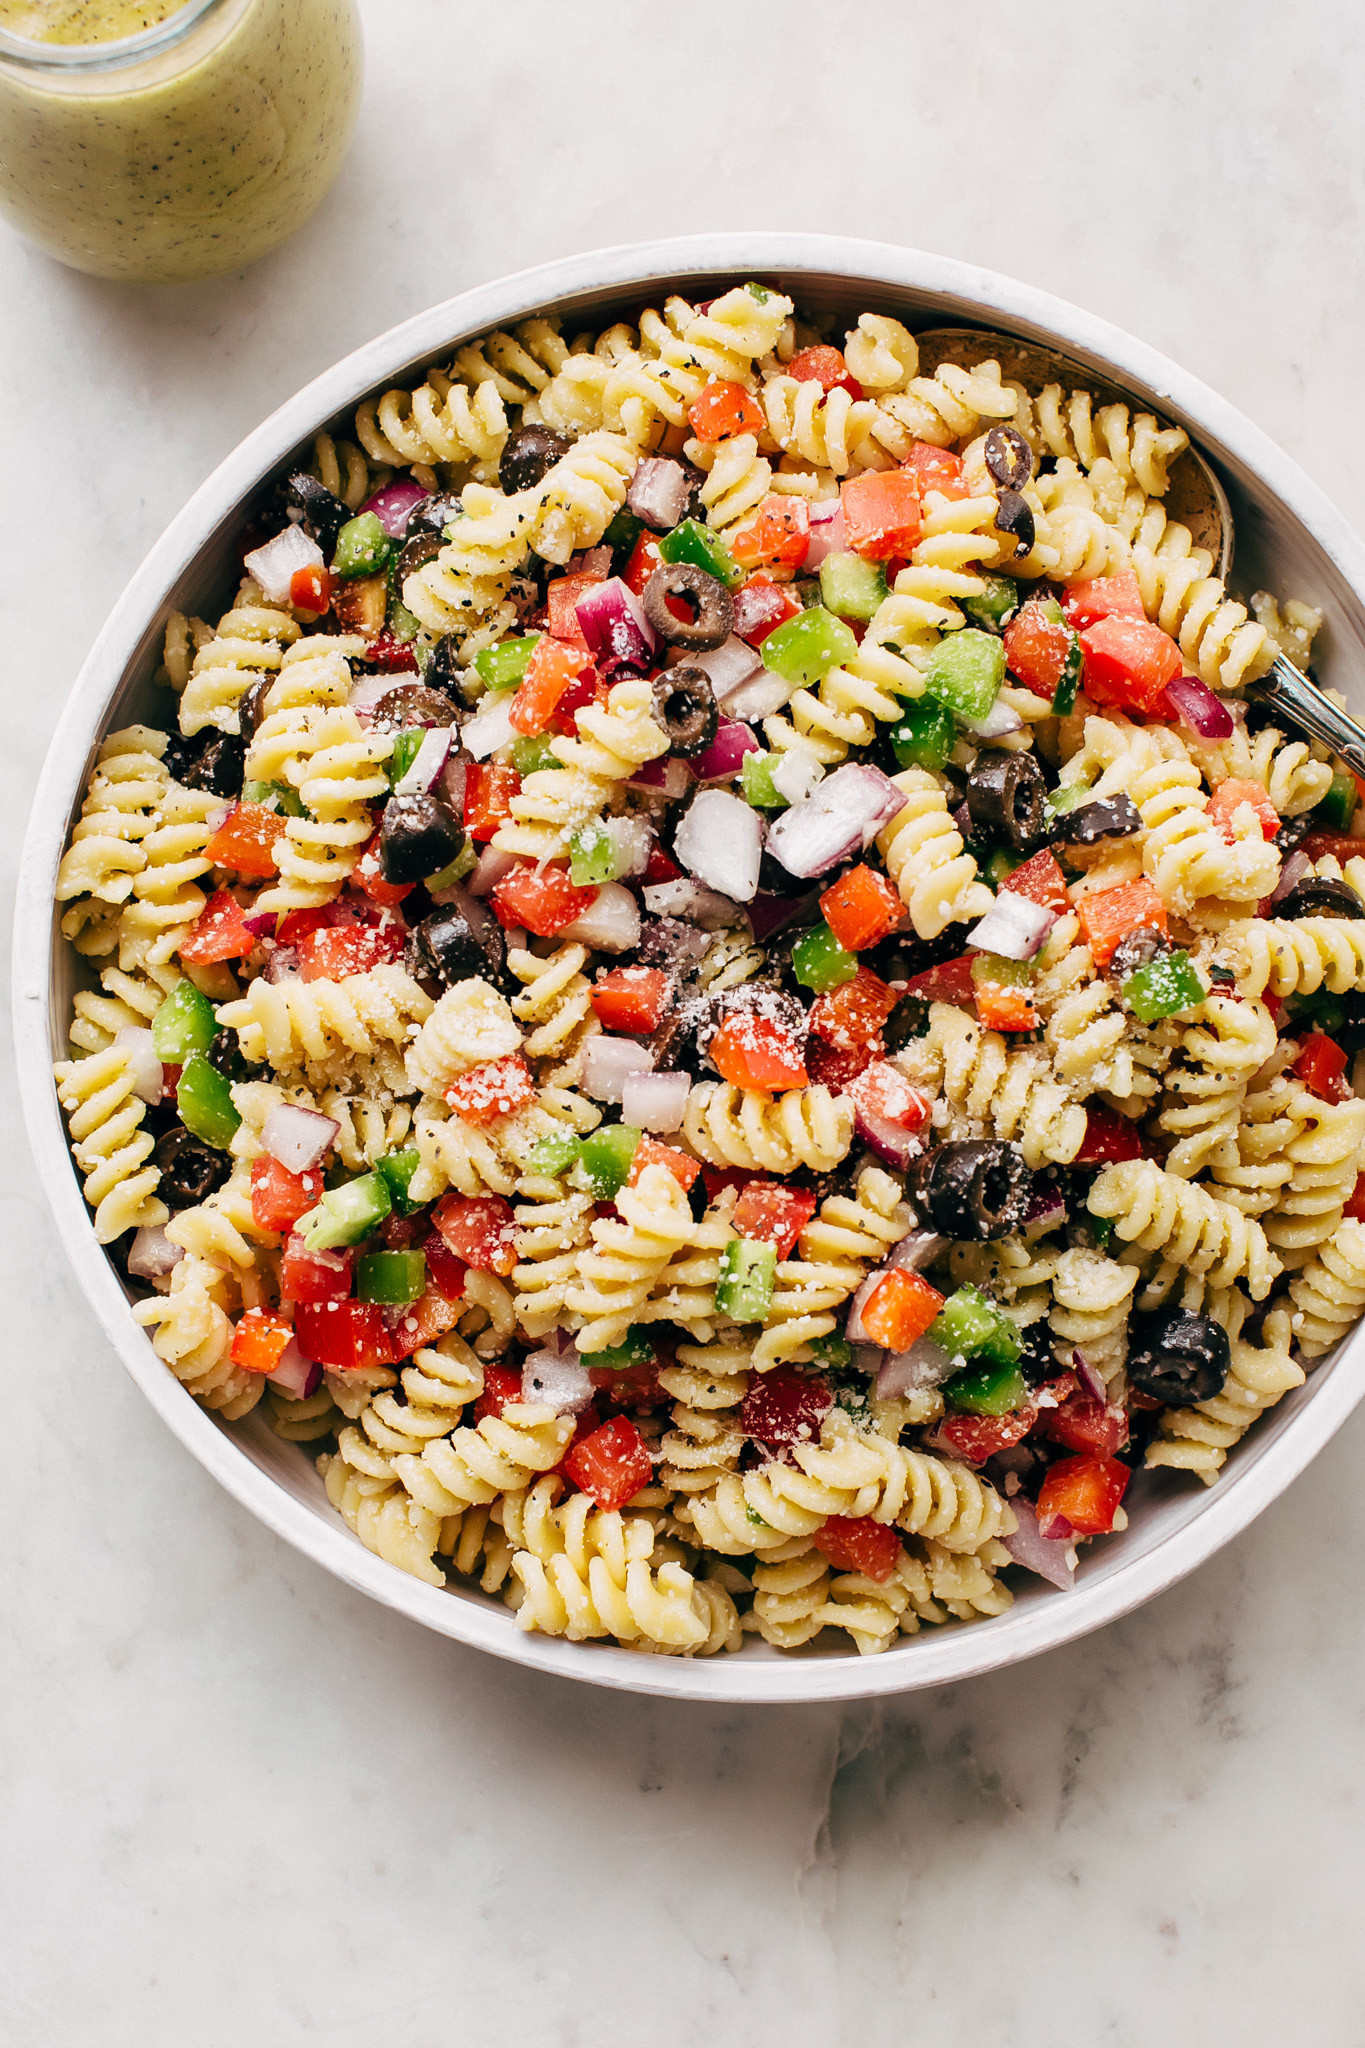 The Most Shared Pasta Salad Recipe with Italian Dressing
 Of All Time